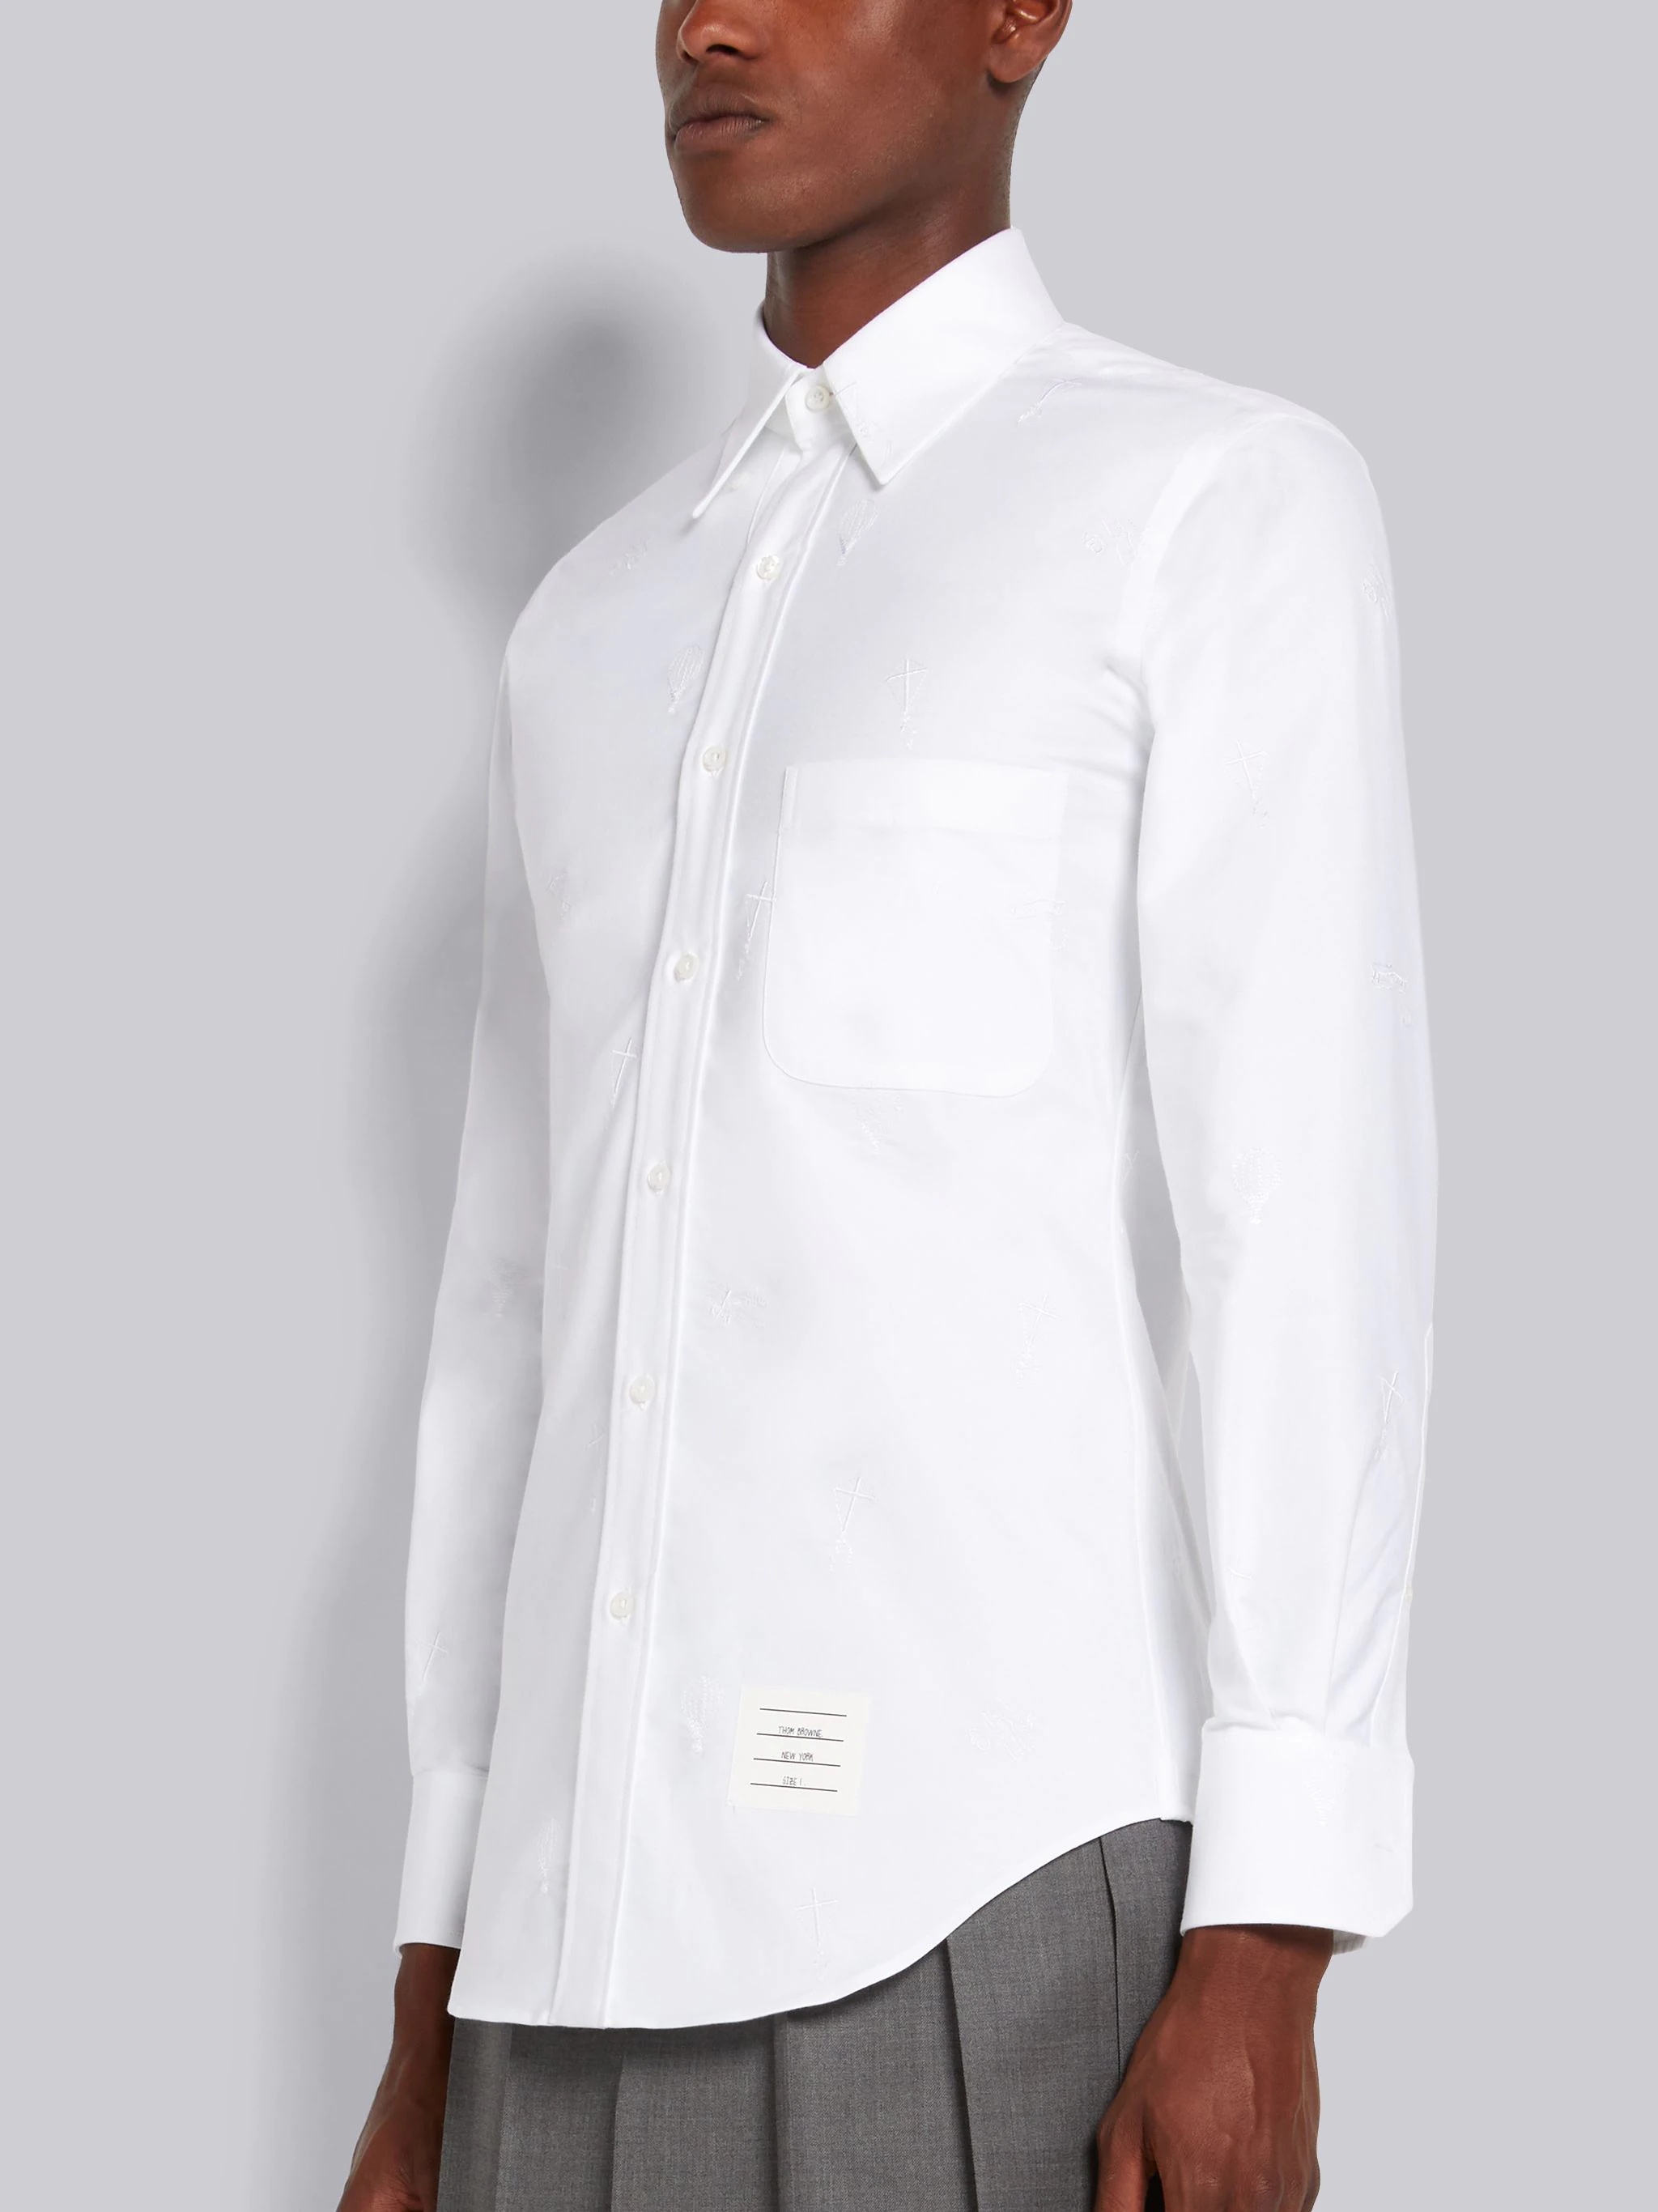 White Oxford Embroidered Half Drop Sky Icon Classic Fit Shirt - 2